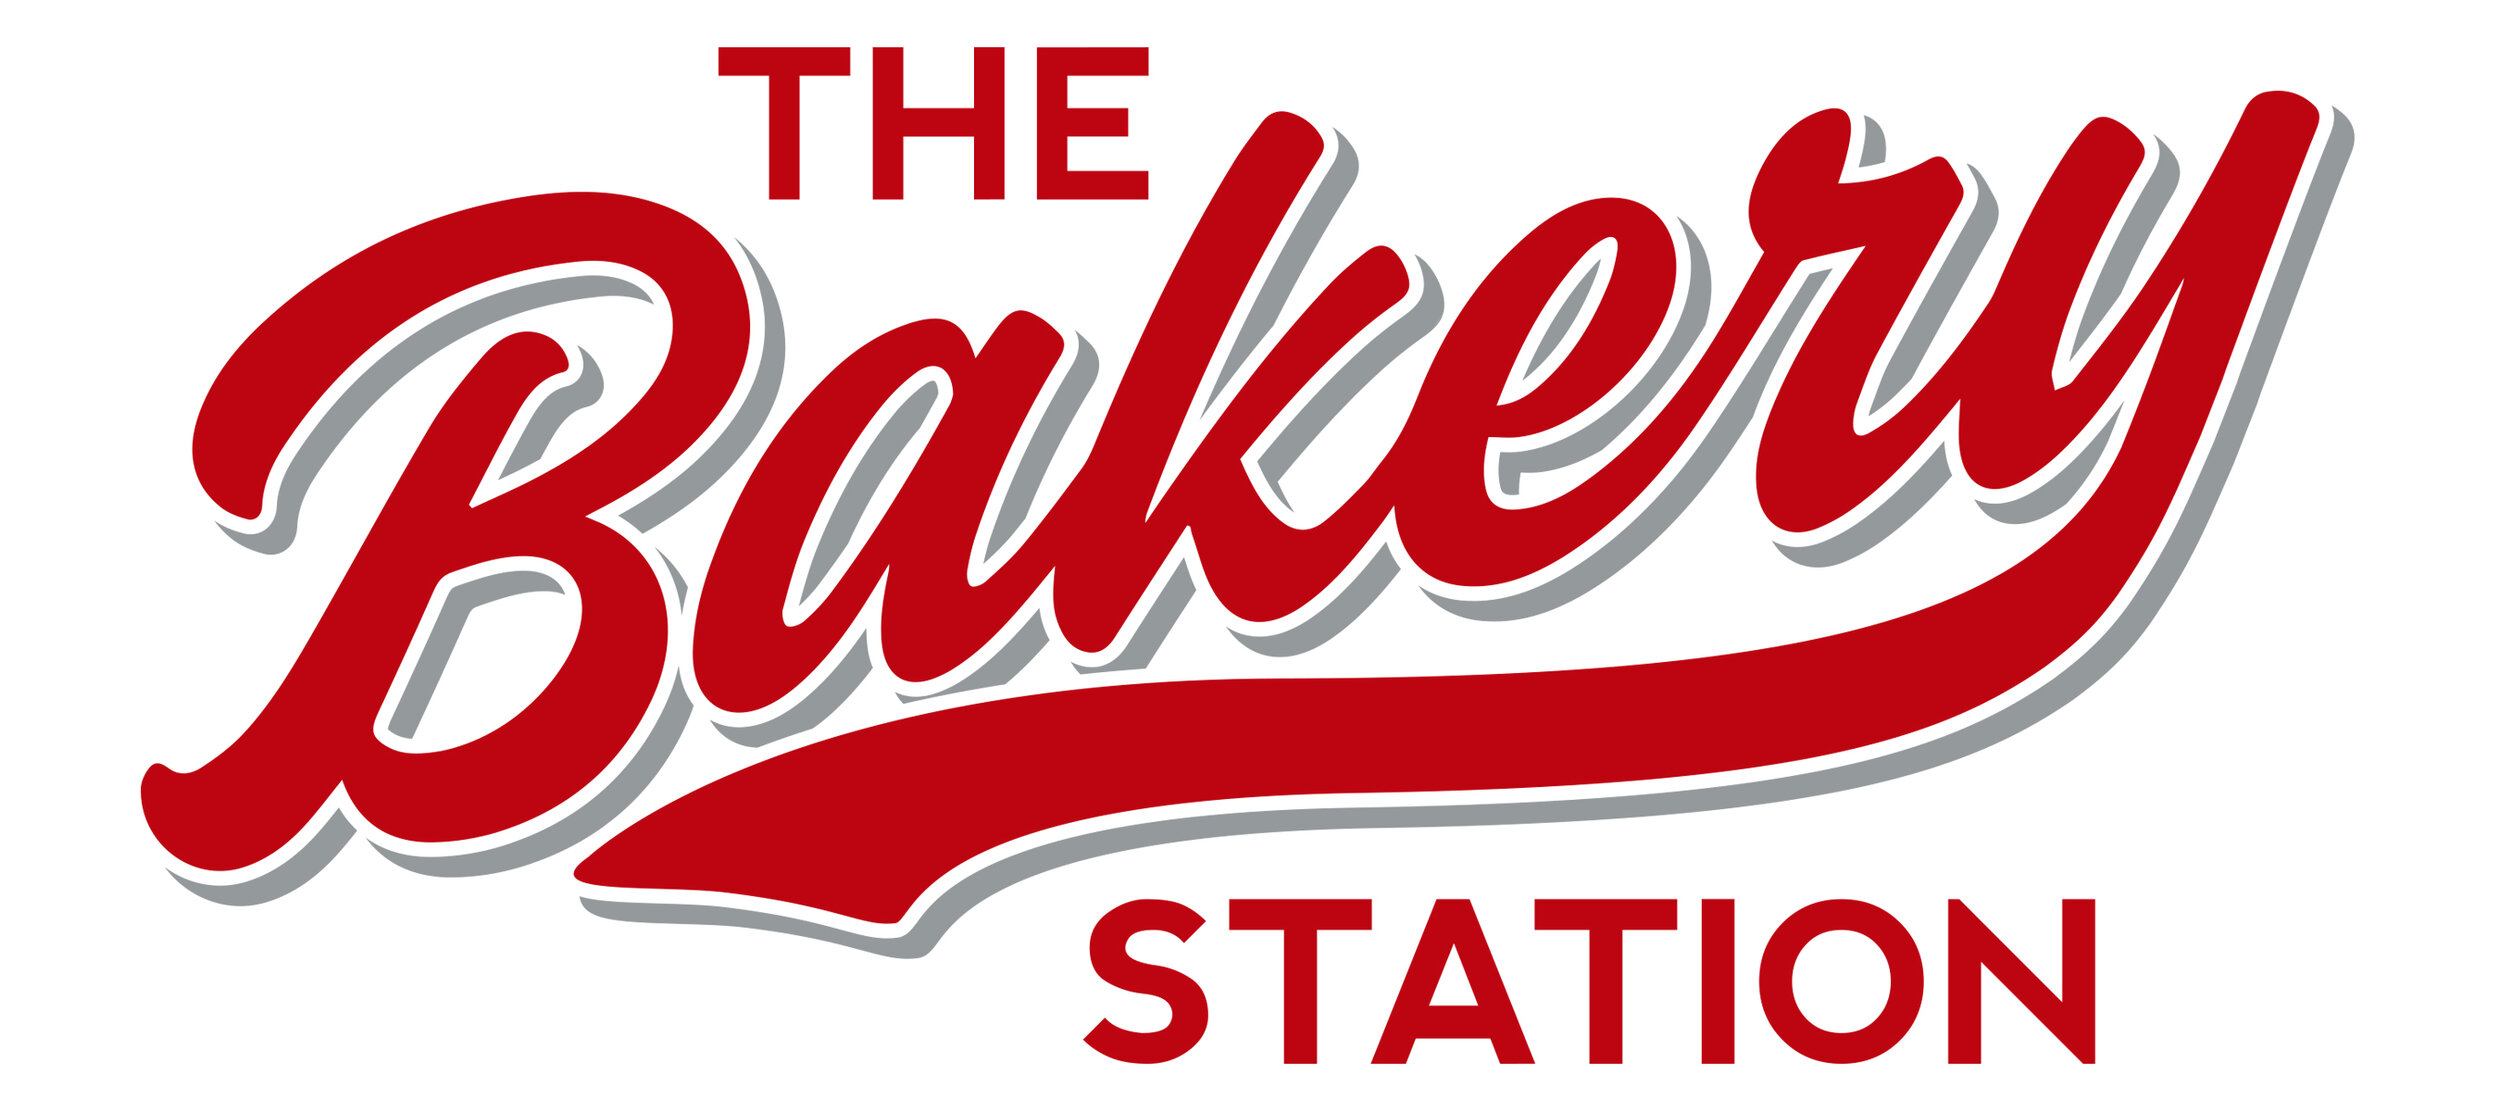 The Bakery Station